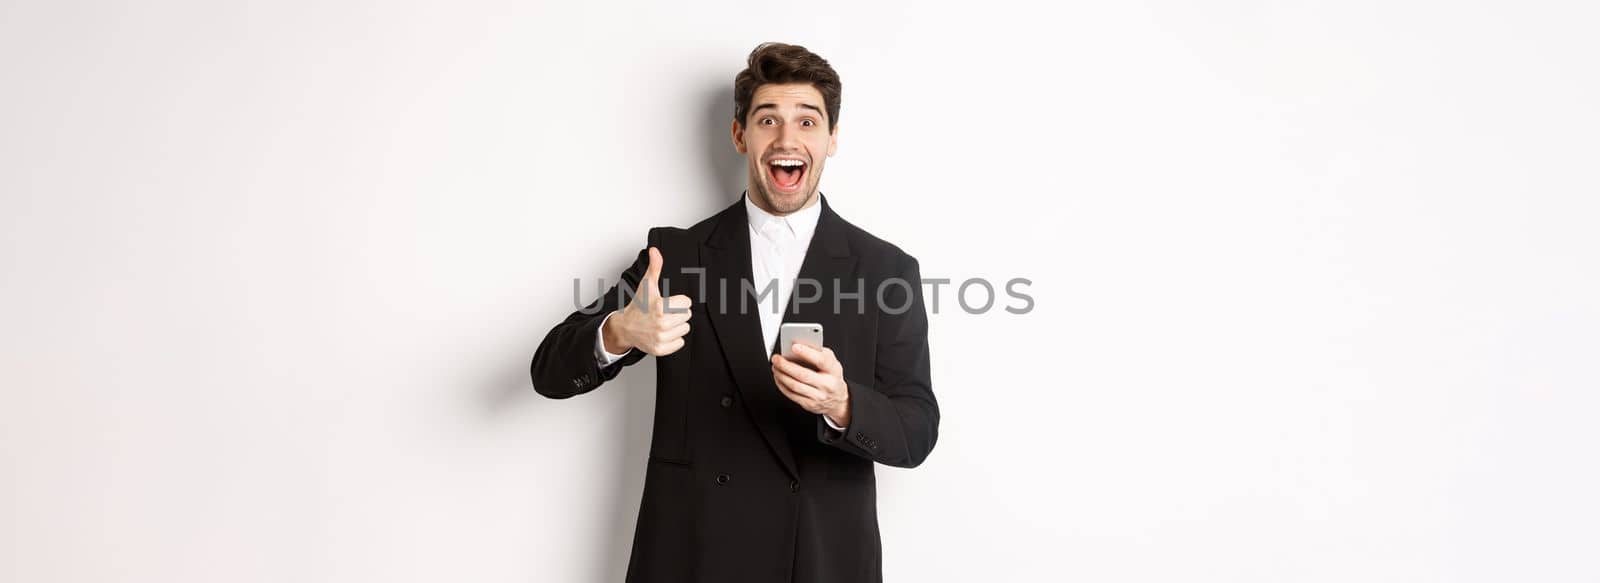 Portrait of handsome man in trendy suit showing thumbs-up in approval, using mobile phone app, smiling pleased, standing over white background.